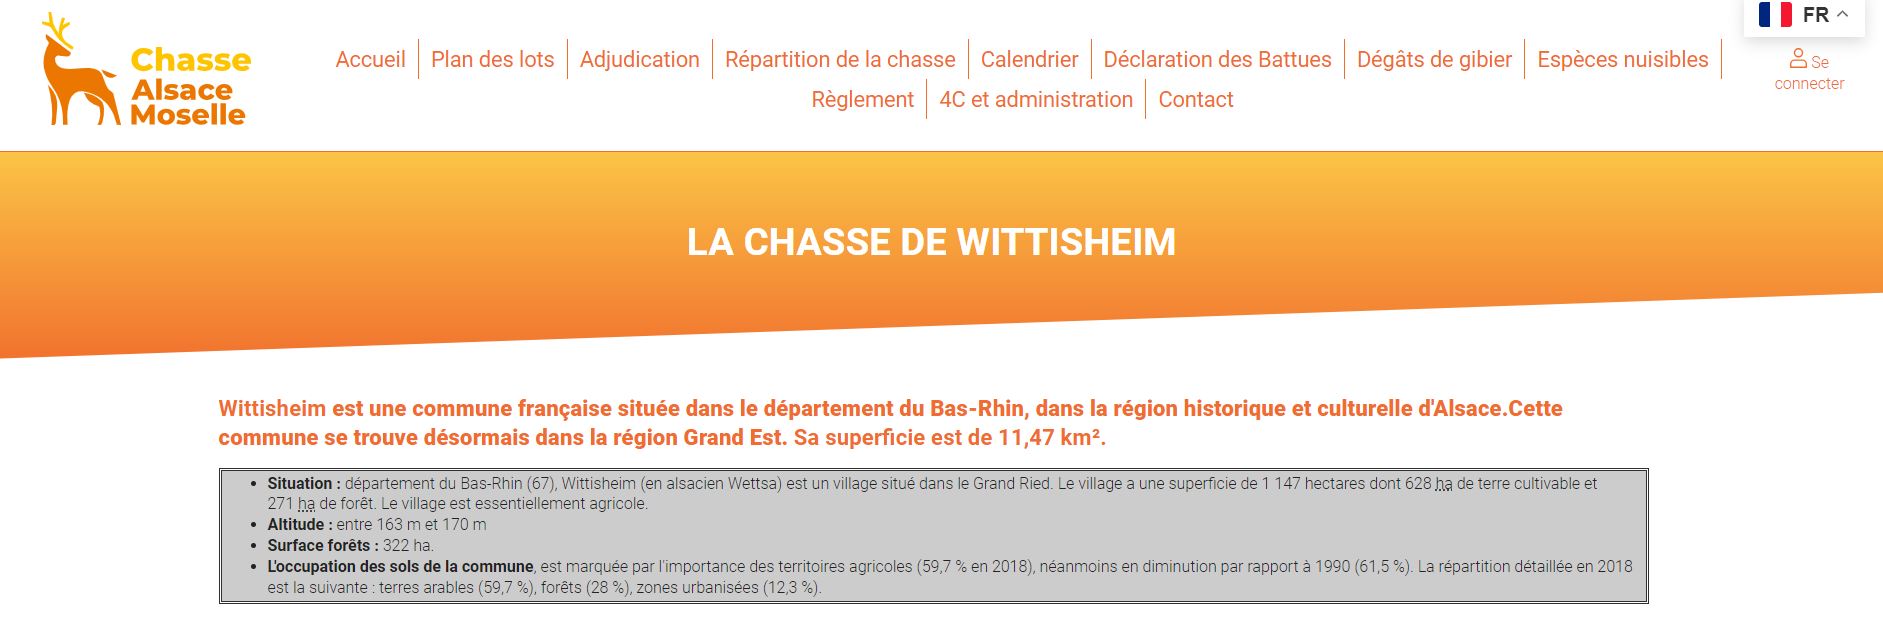 Chasse - image portail